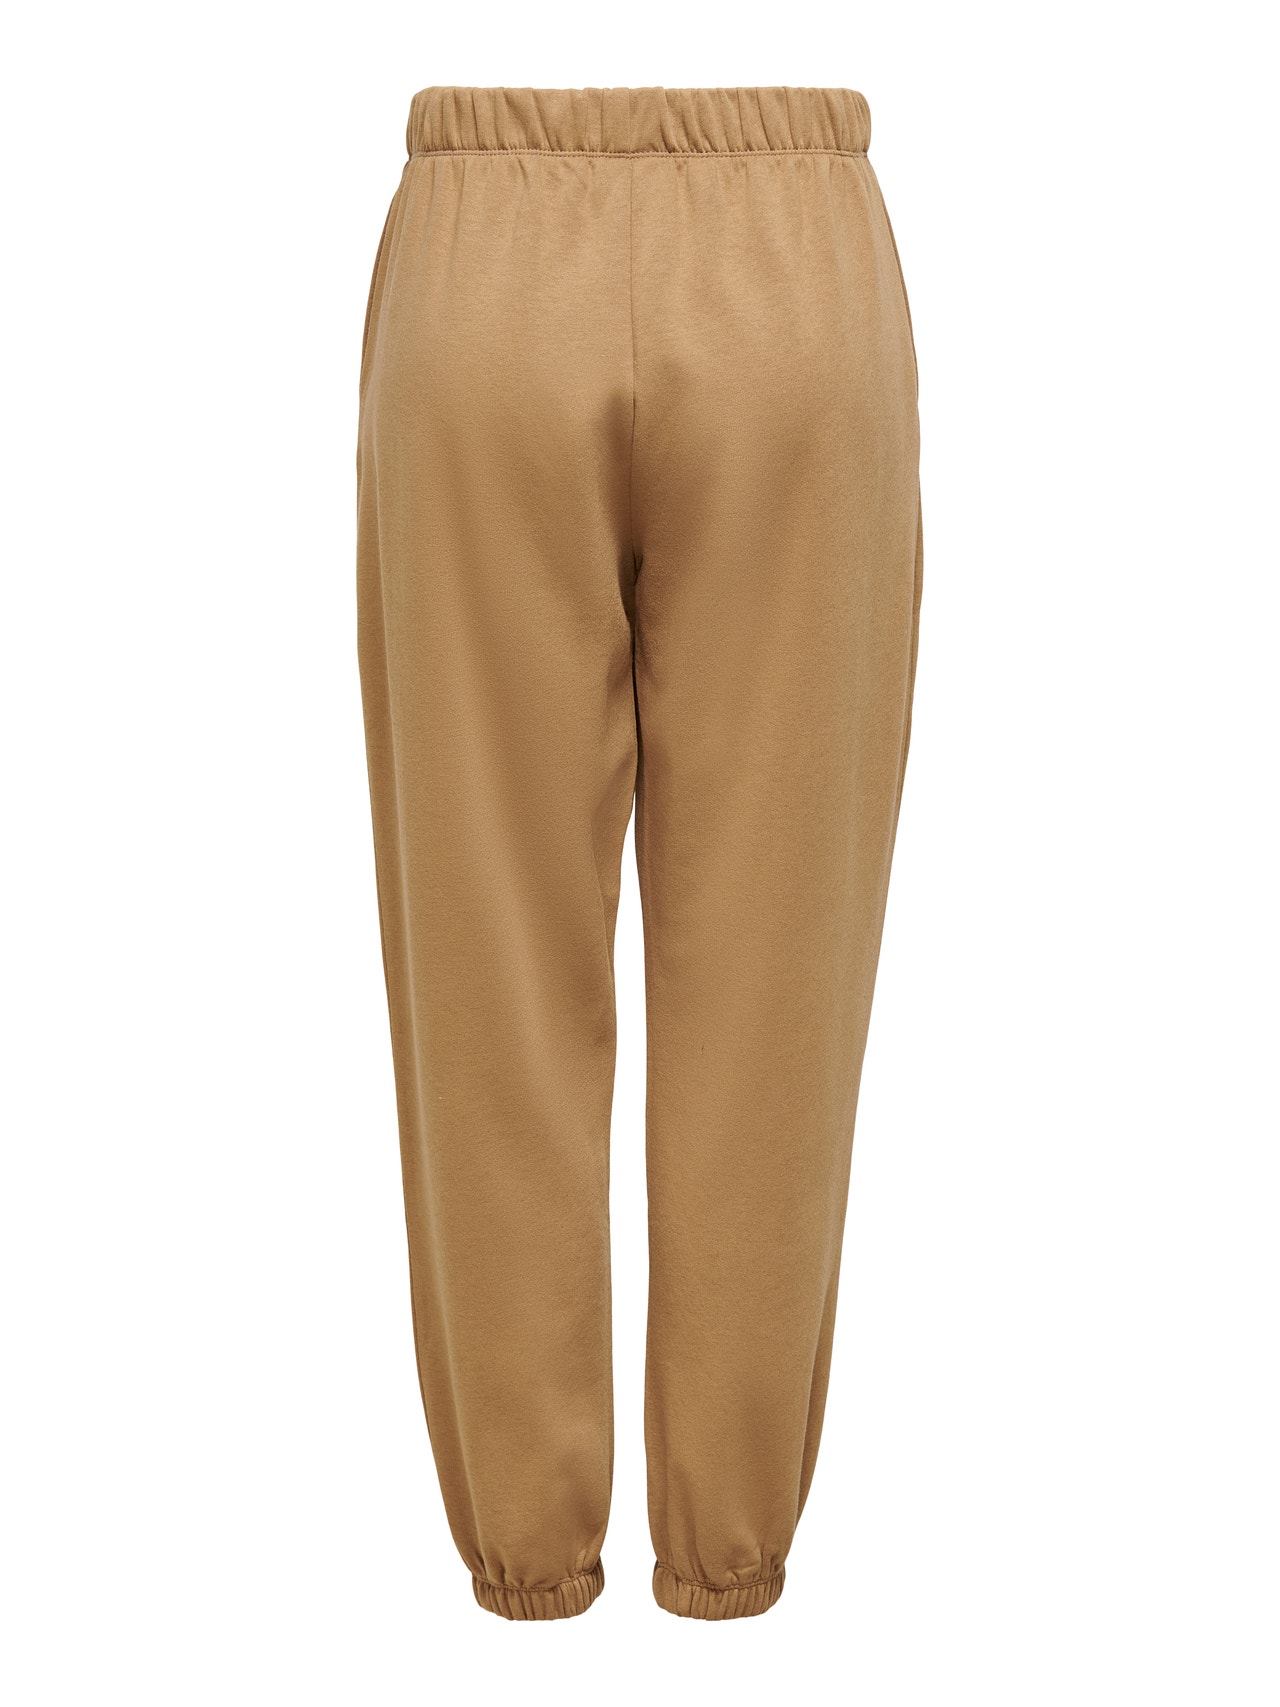 ONLY Regular Fit Elasticated hems Trousers -Toasted Coconut - 15223158